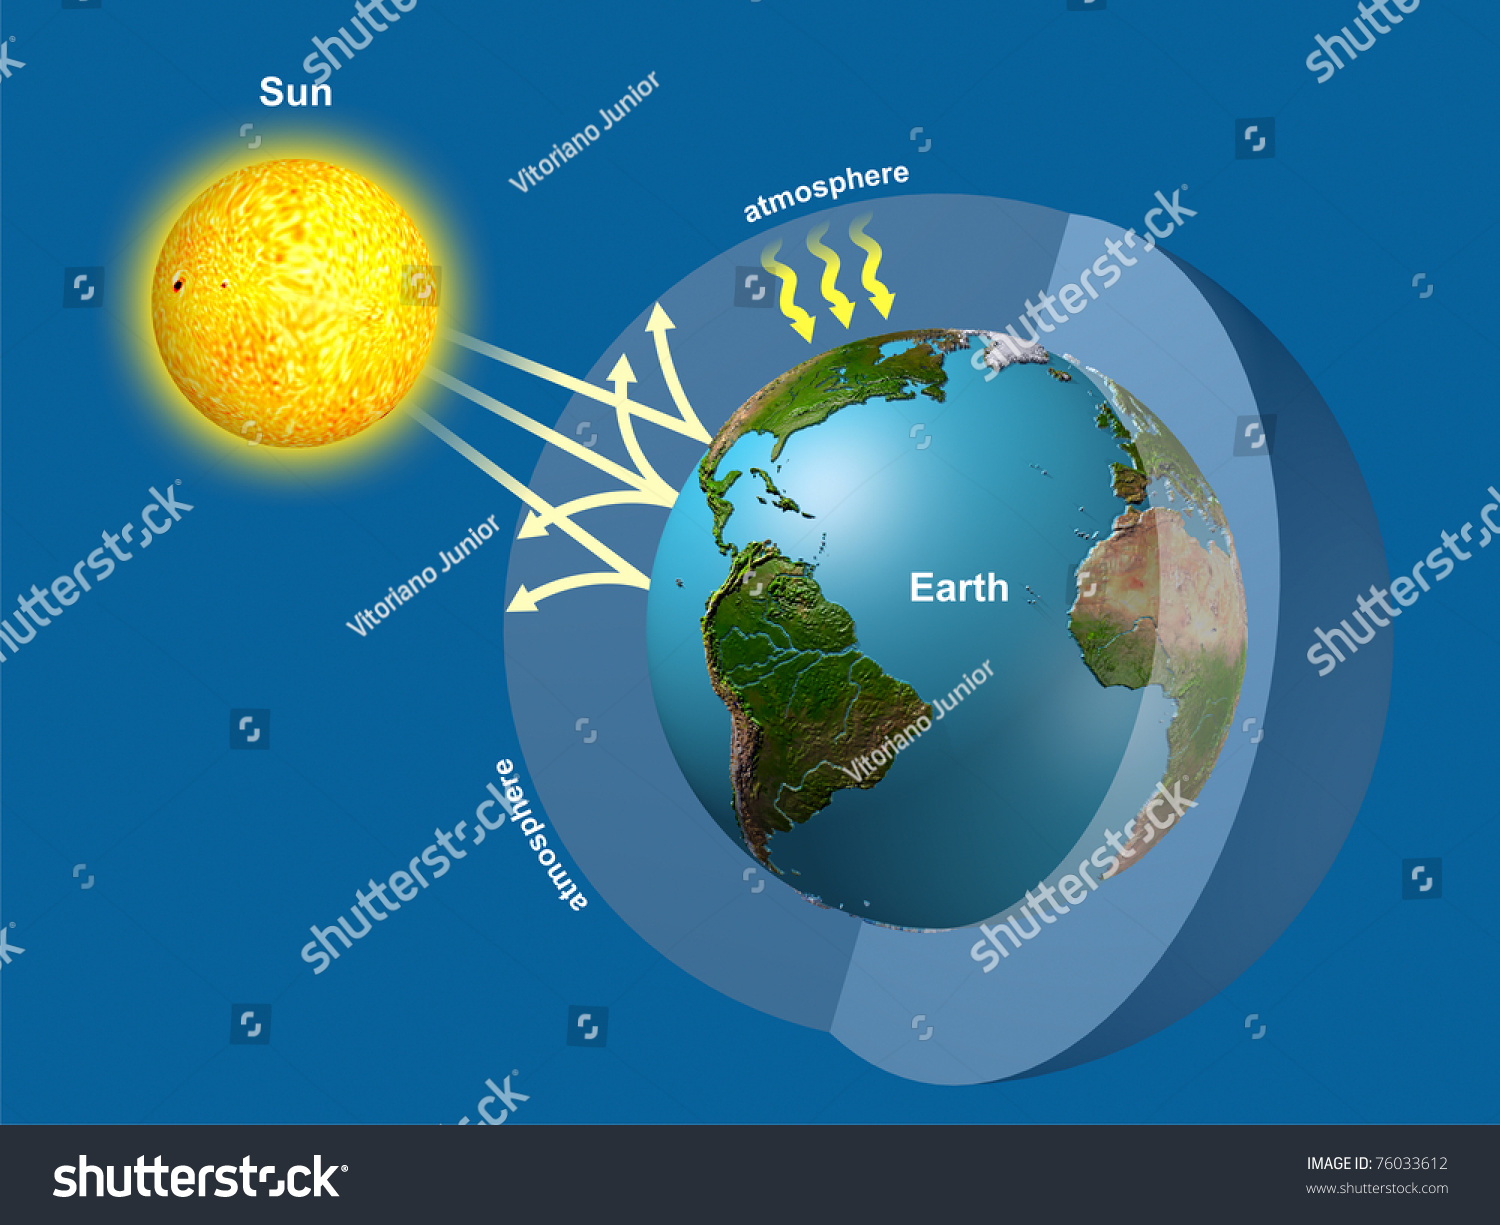 Greenhouse Effect Computer Graphic Stock Illustration 76033612 ...